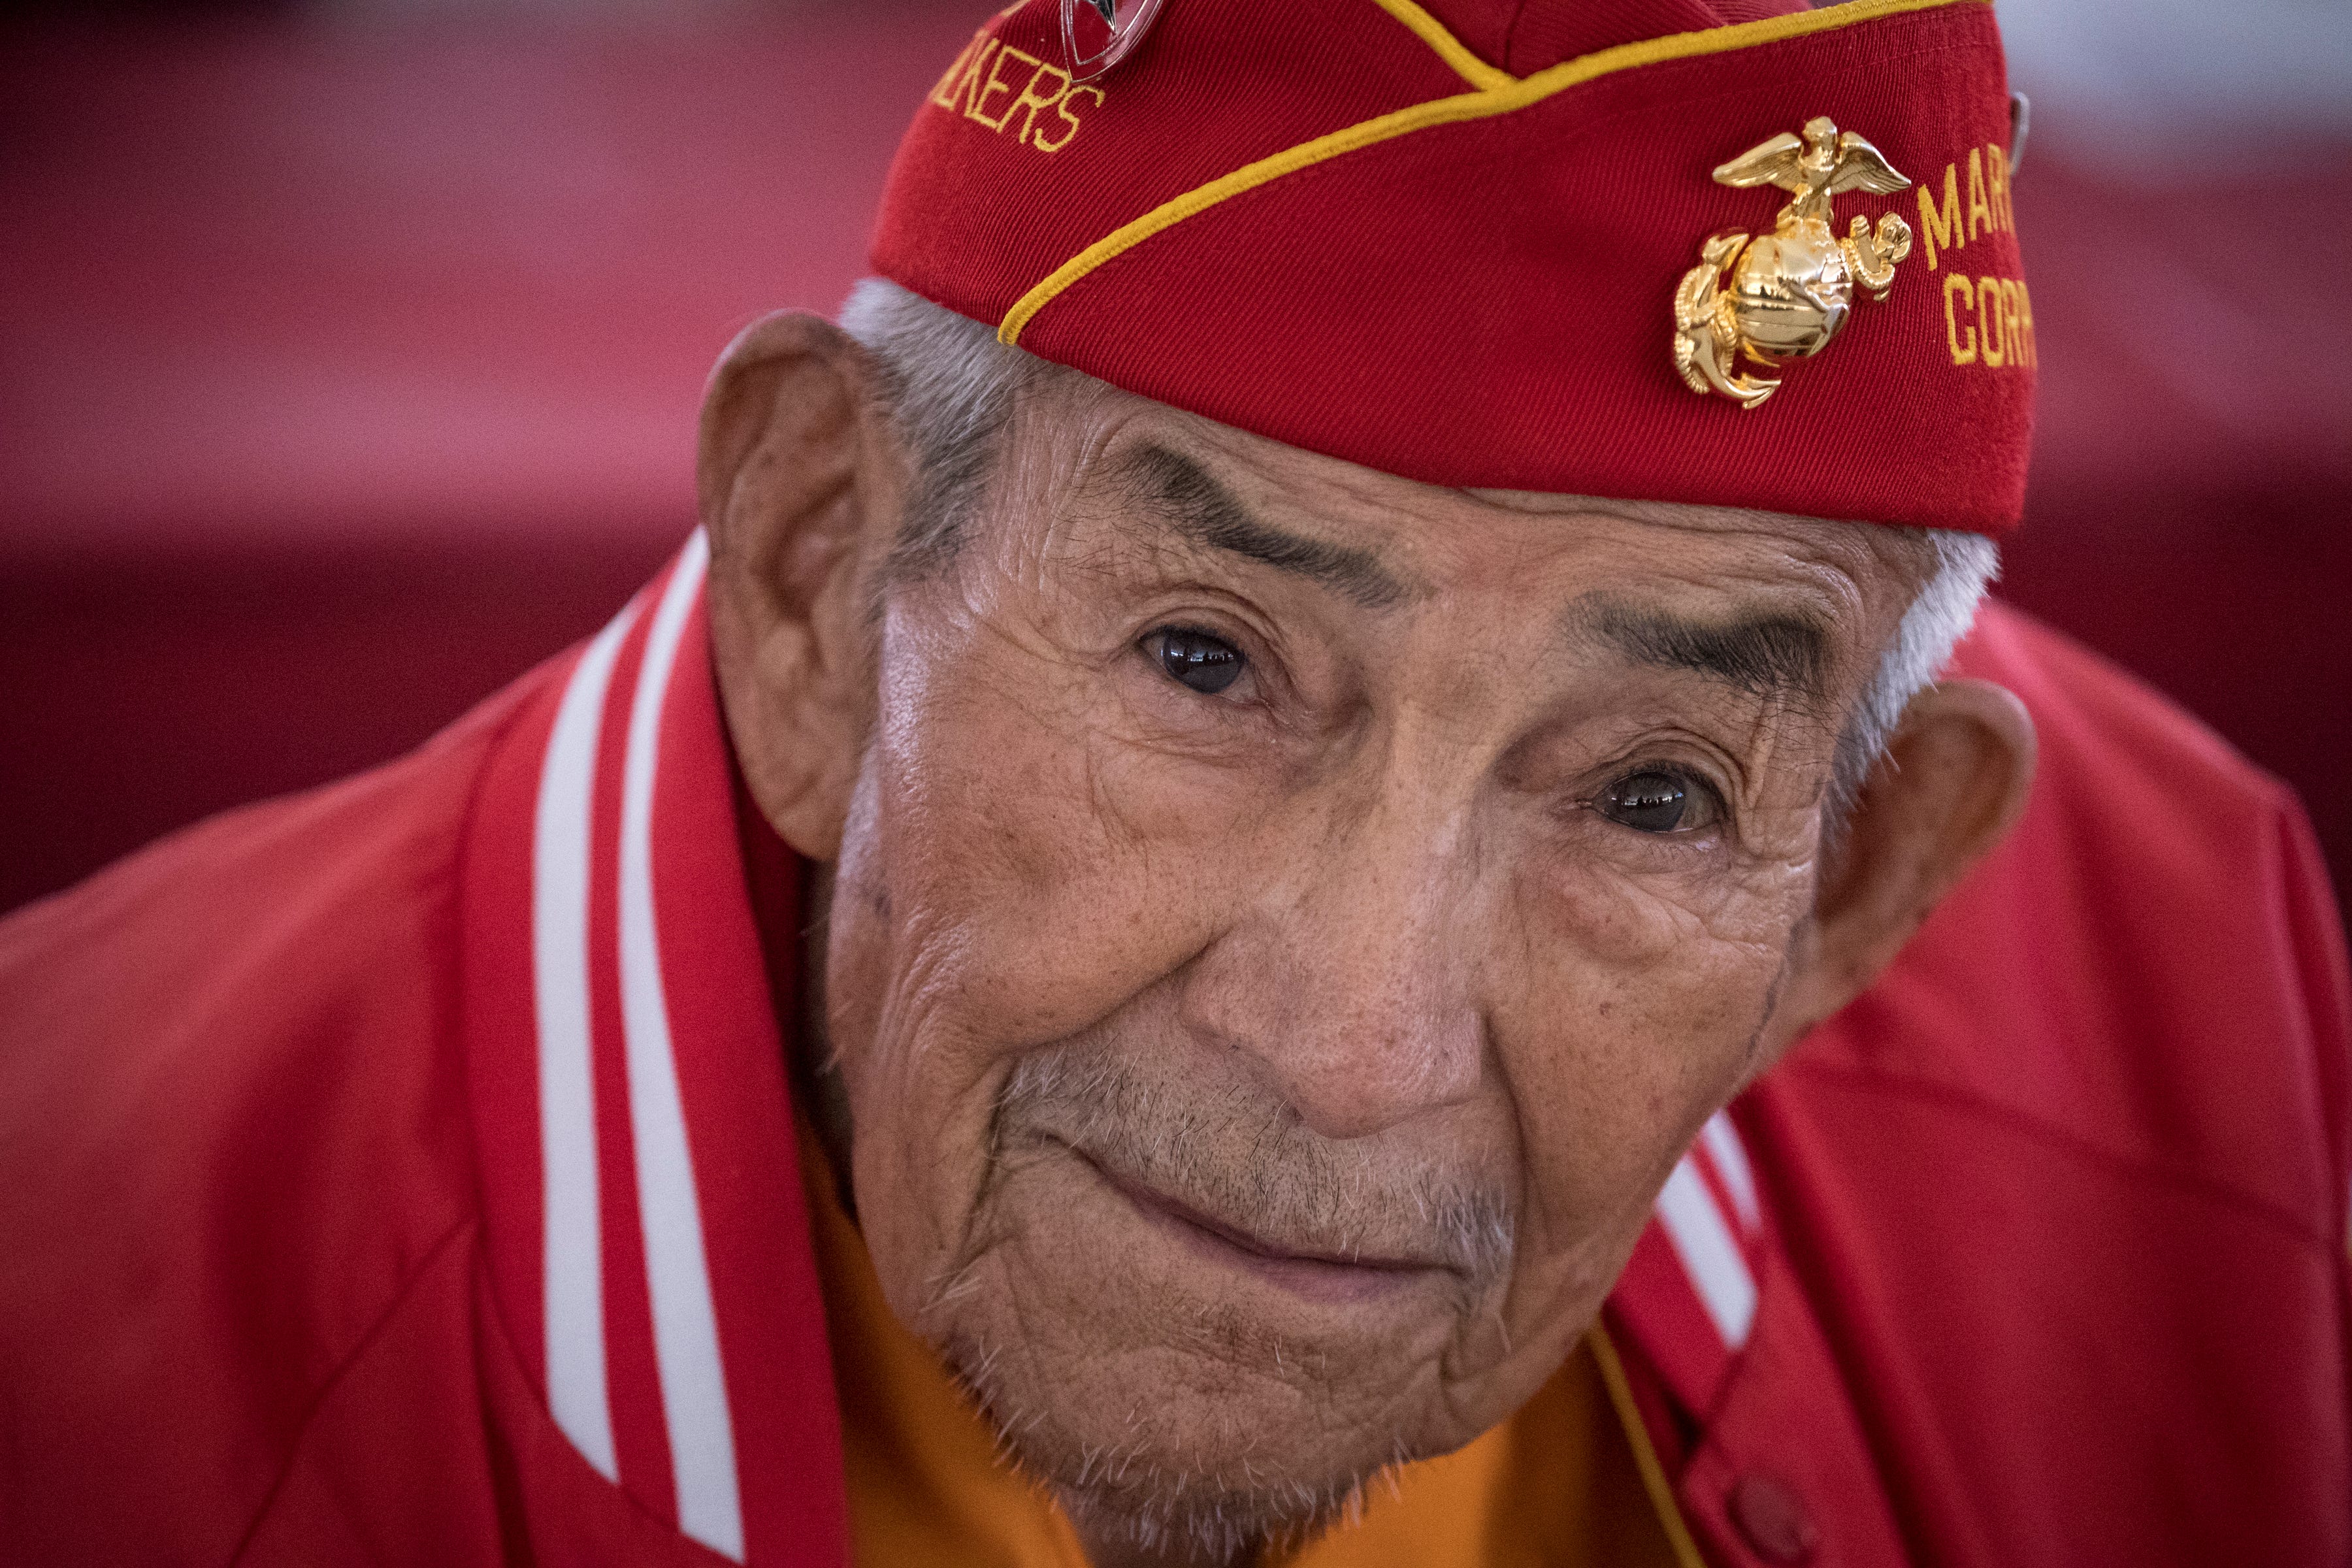 Navajo Code Talker Alfred Newman listens to the Marine Forces Reserve Band during the Navajo Nation Code Talkers Day ceremony Aug. 14, 2018, at the Veterans Memorial Park in Window Rock.